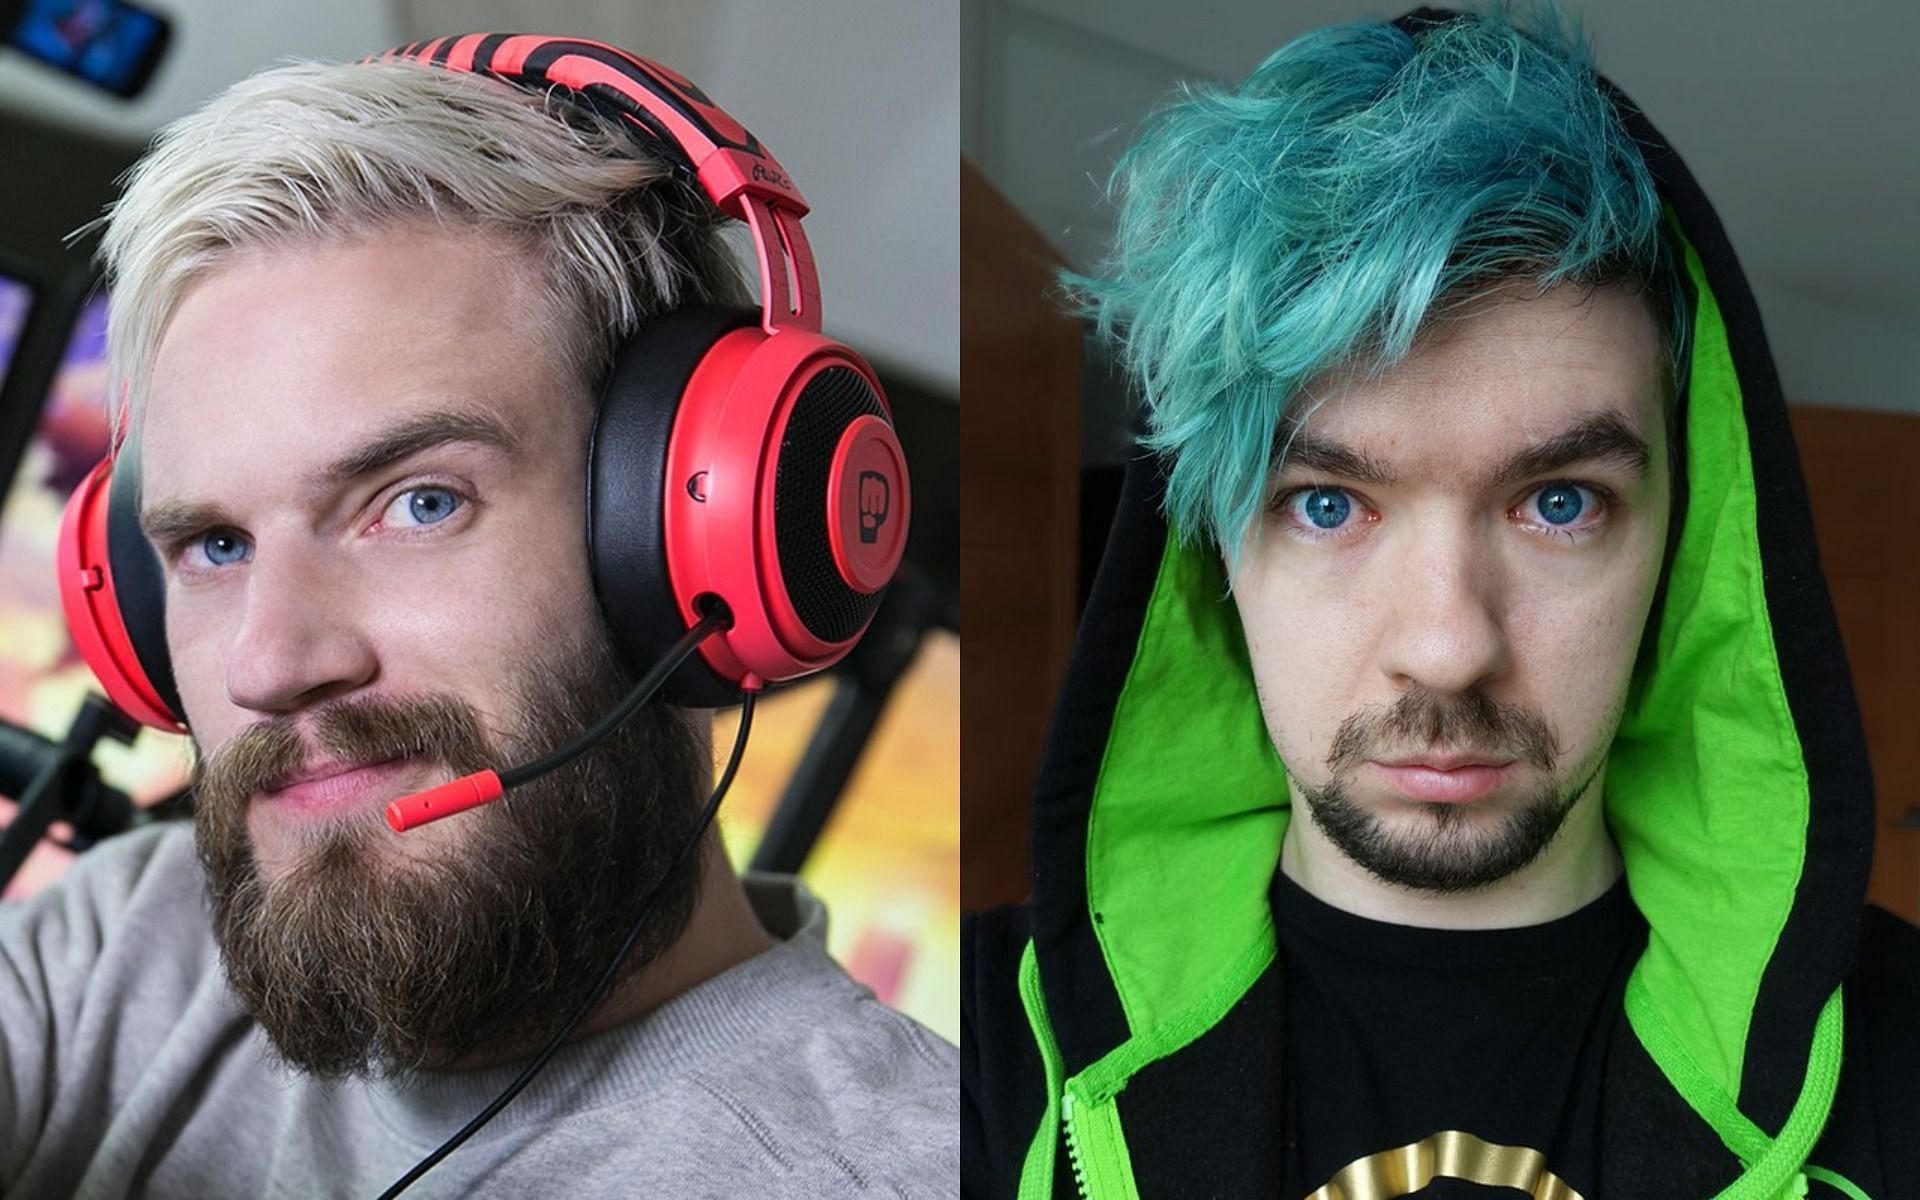 Pewdiepie and Jacksepticeye face off in a physically-intense game of Ddakji (Images via Twitter)